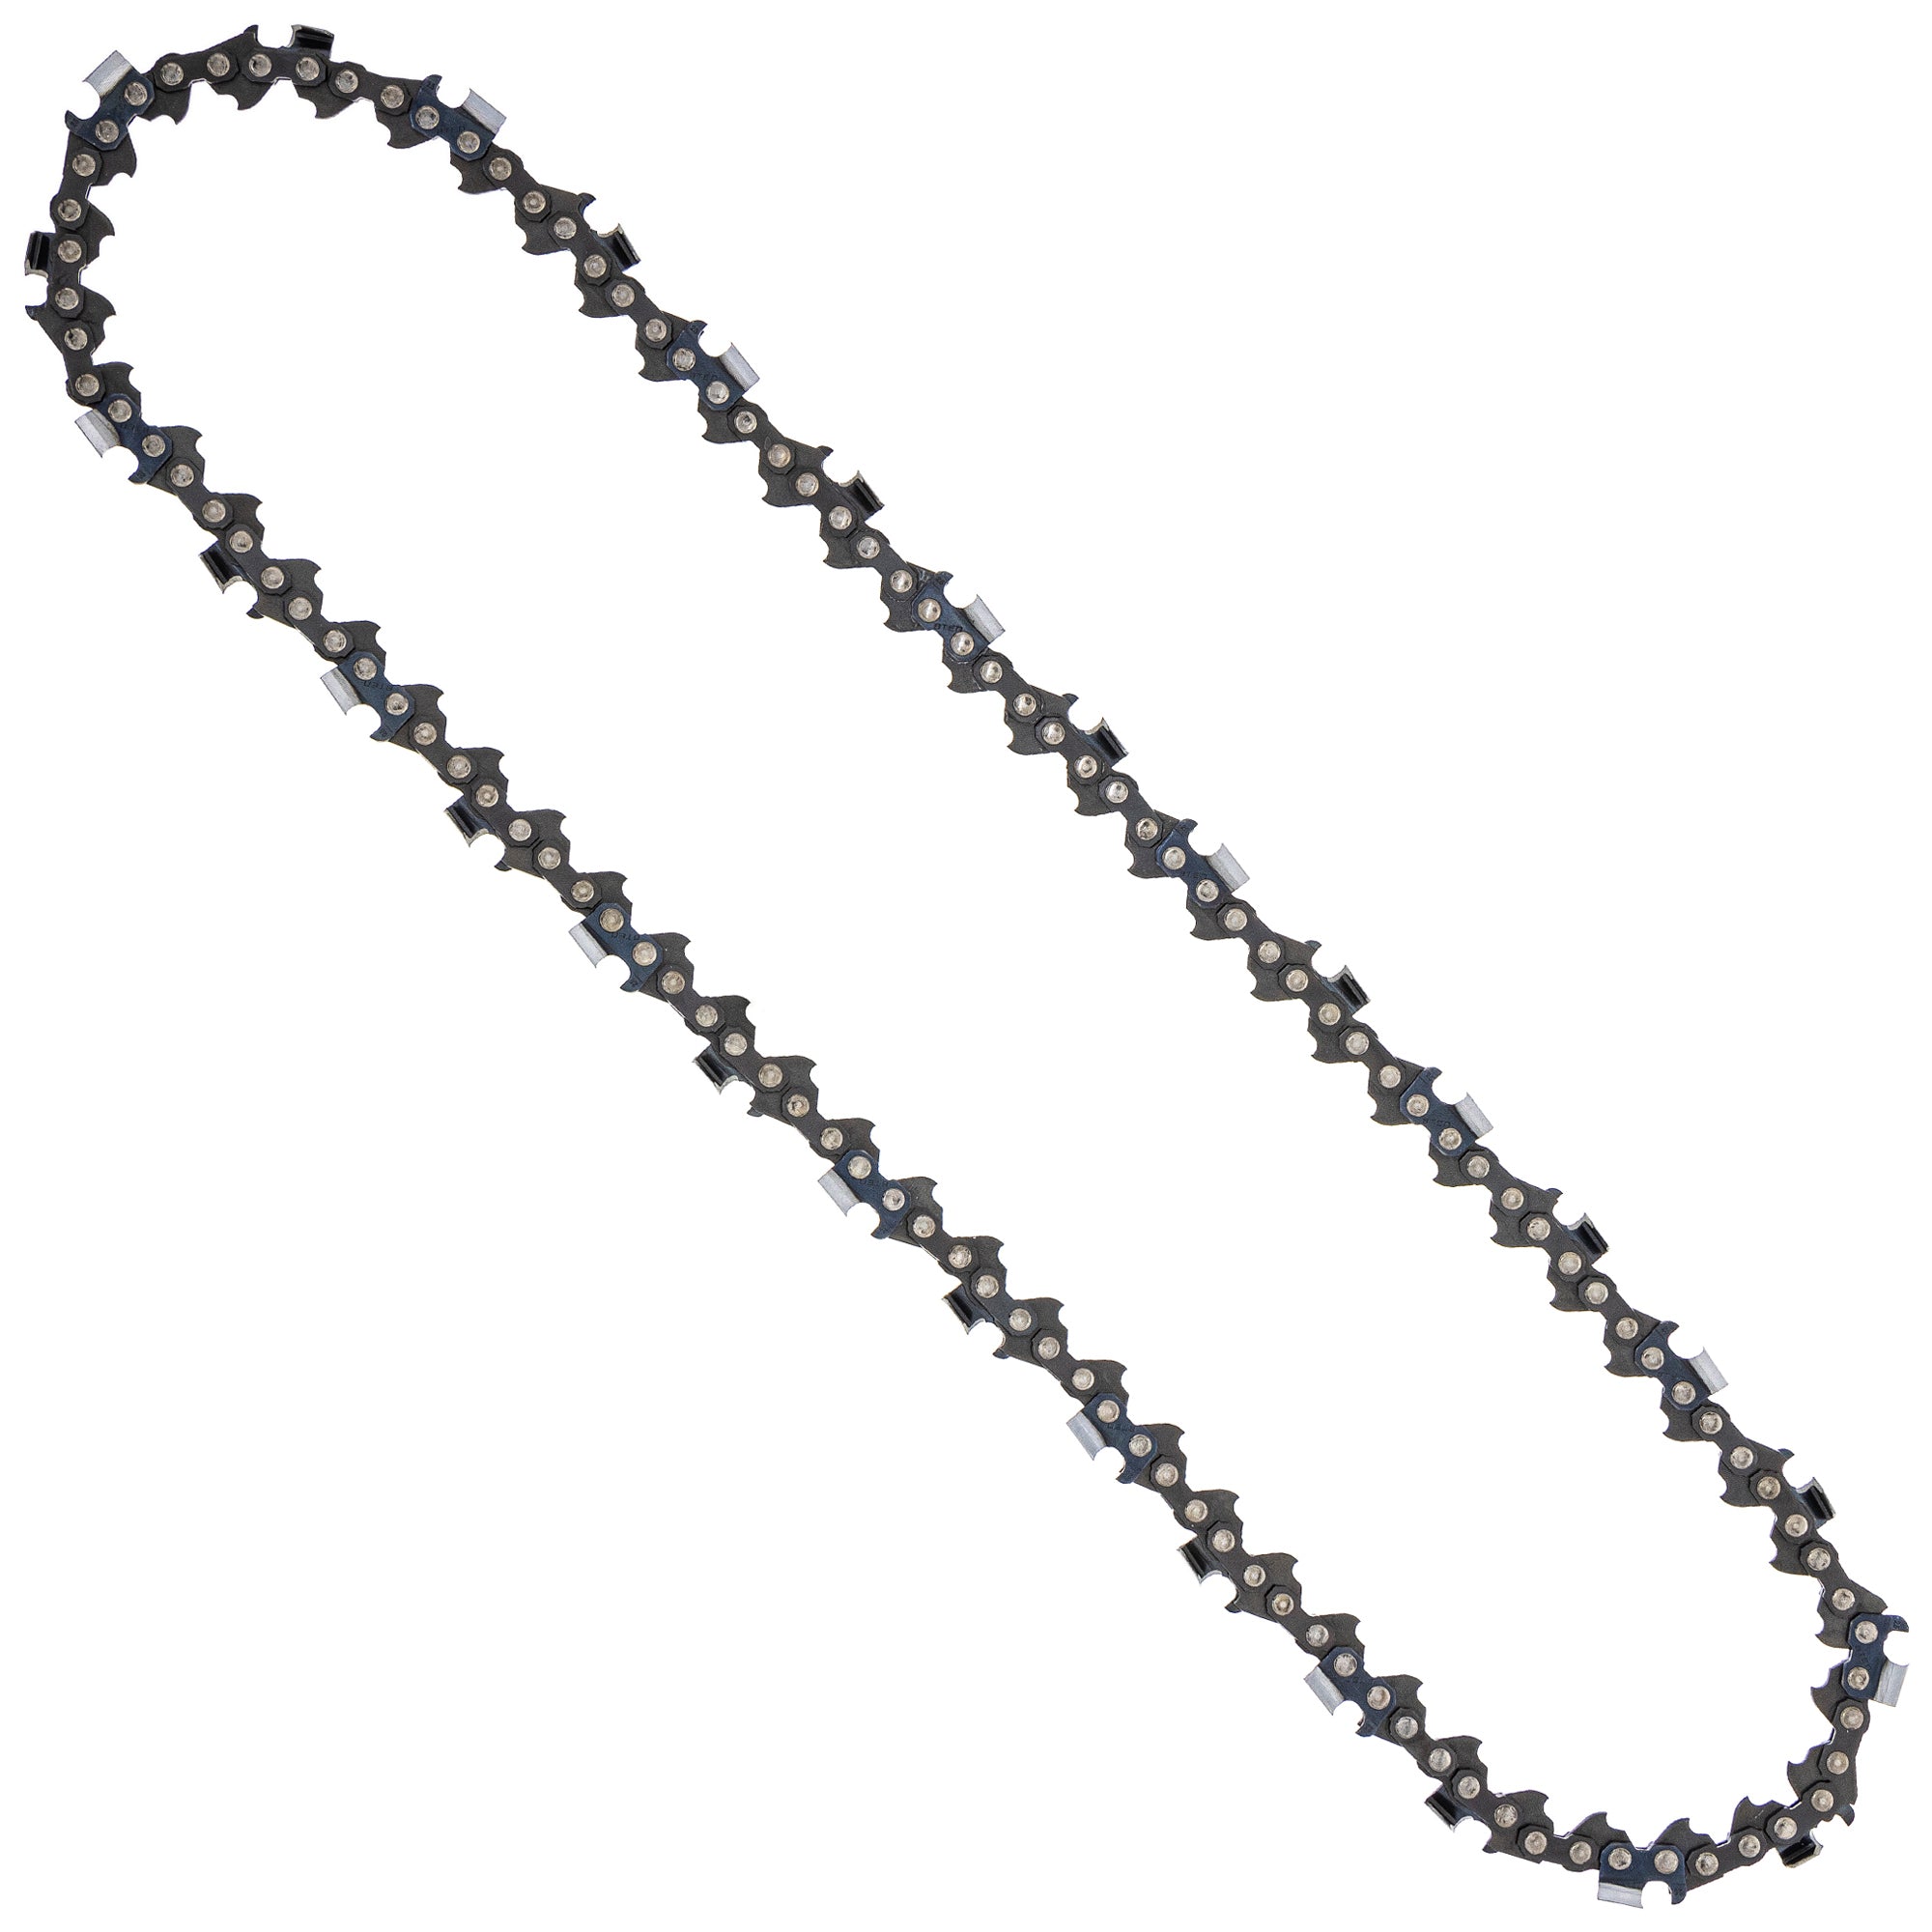 8TEN 810-CCC2360H Chain 6-Pack for zOTHER Oregon Husqvarna Poulan